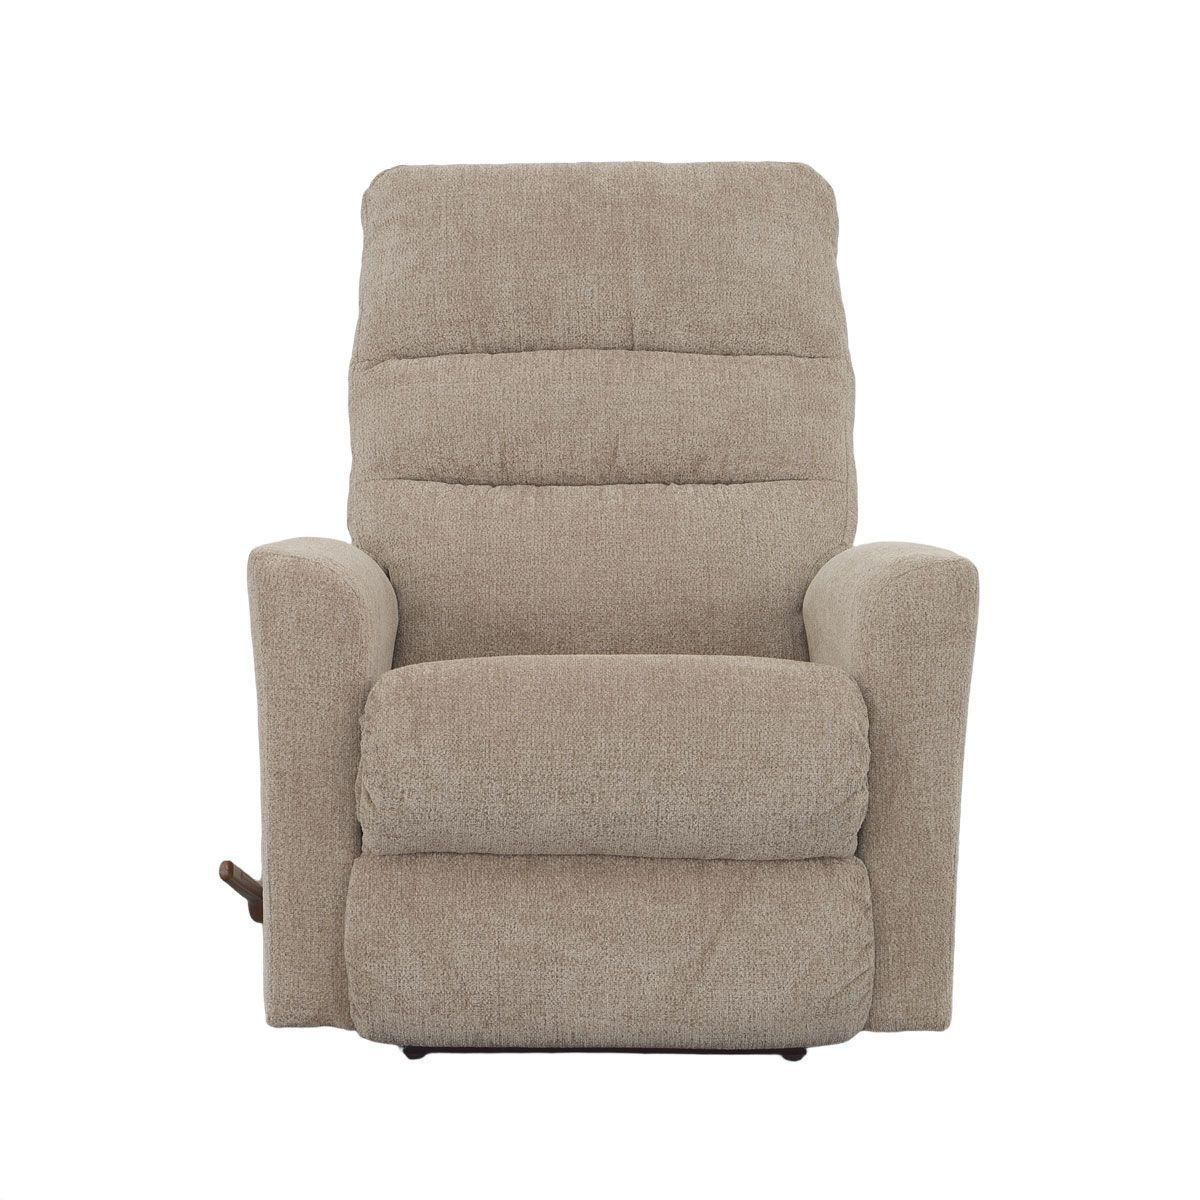 Balanced Body Avalon Chair with Barrel - general for sale - by owner -  craigslist